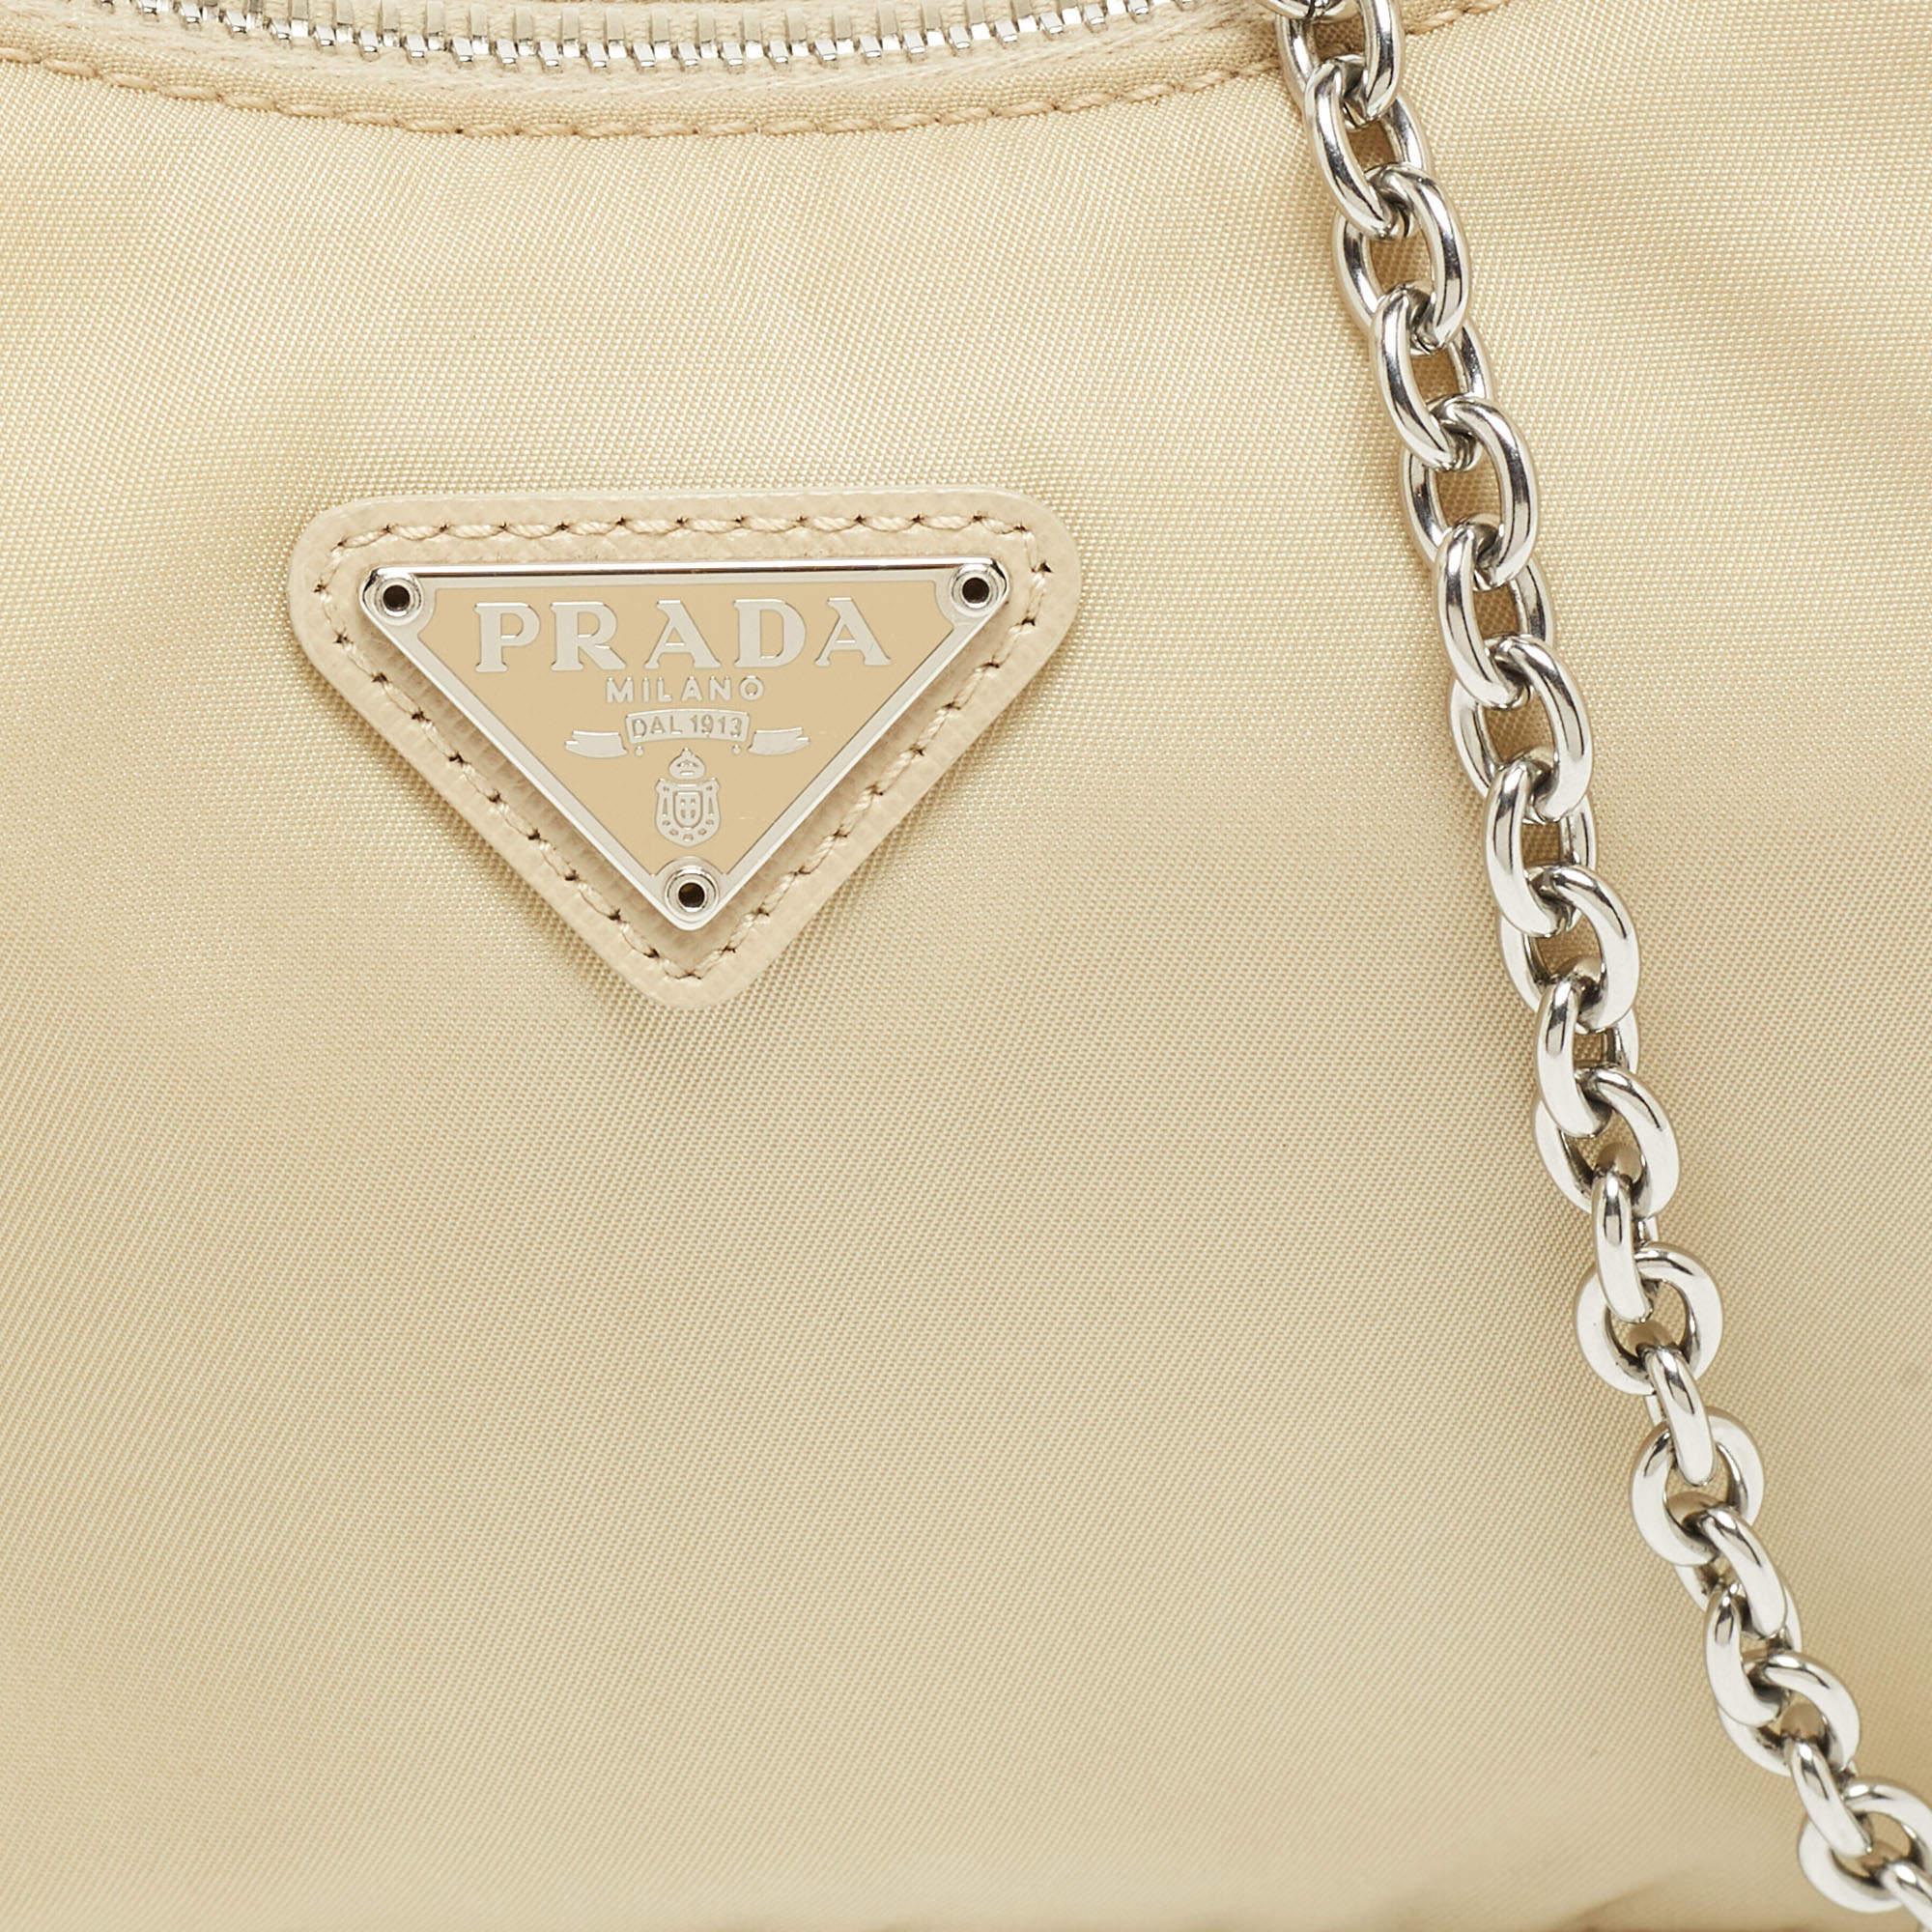 Prada Beige Nylon and Leather Re-Edition 2005 Baguette Bag 1